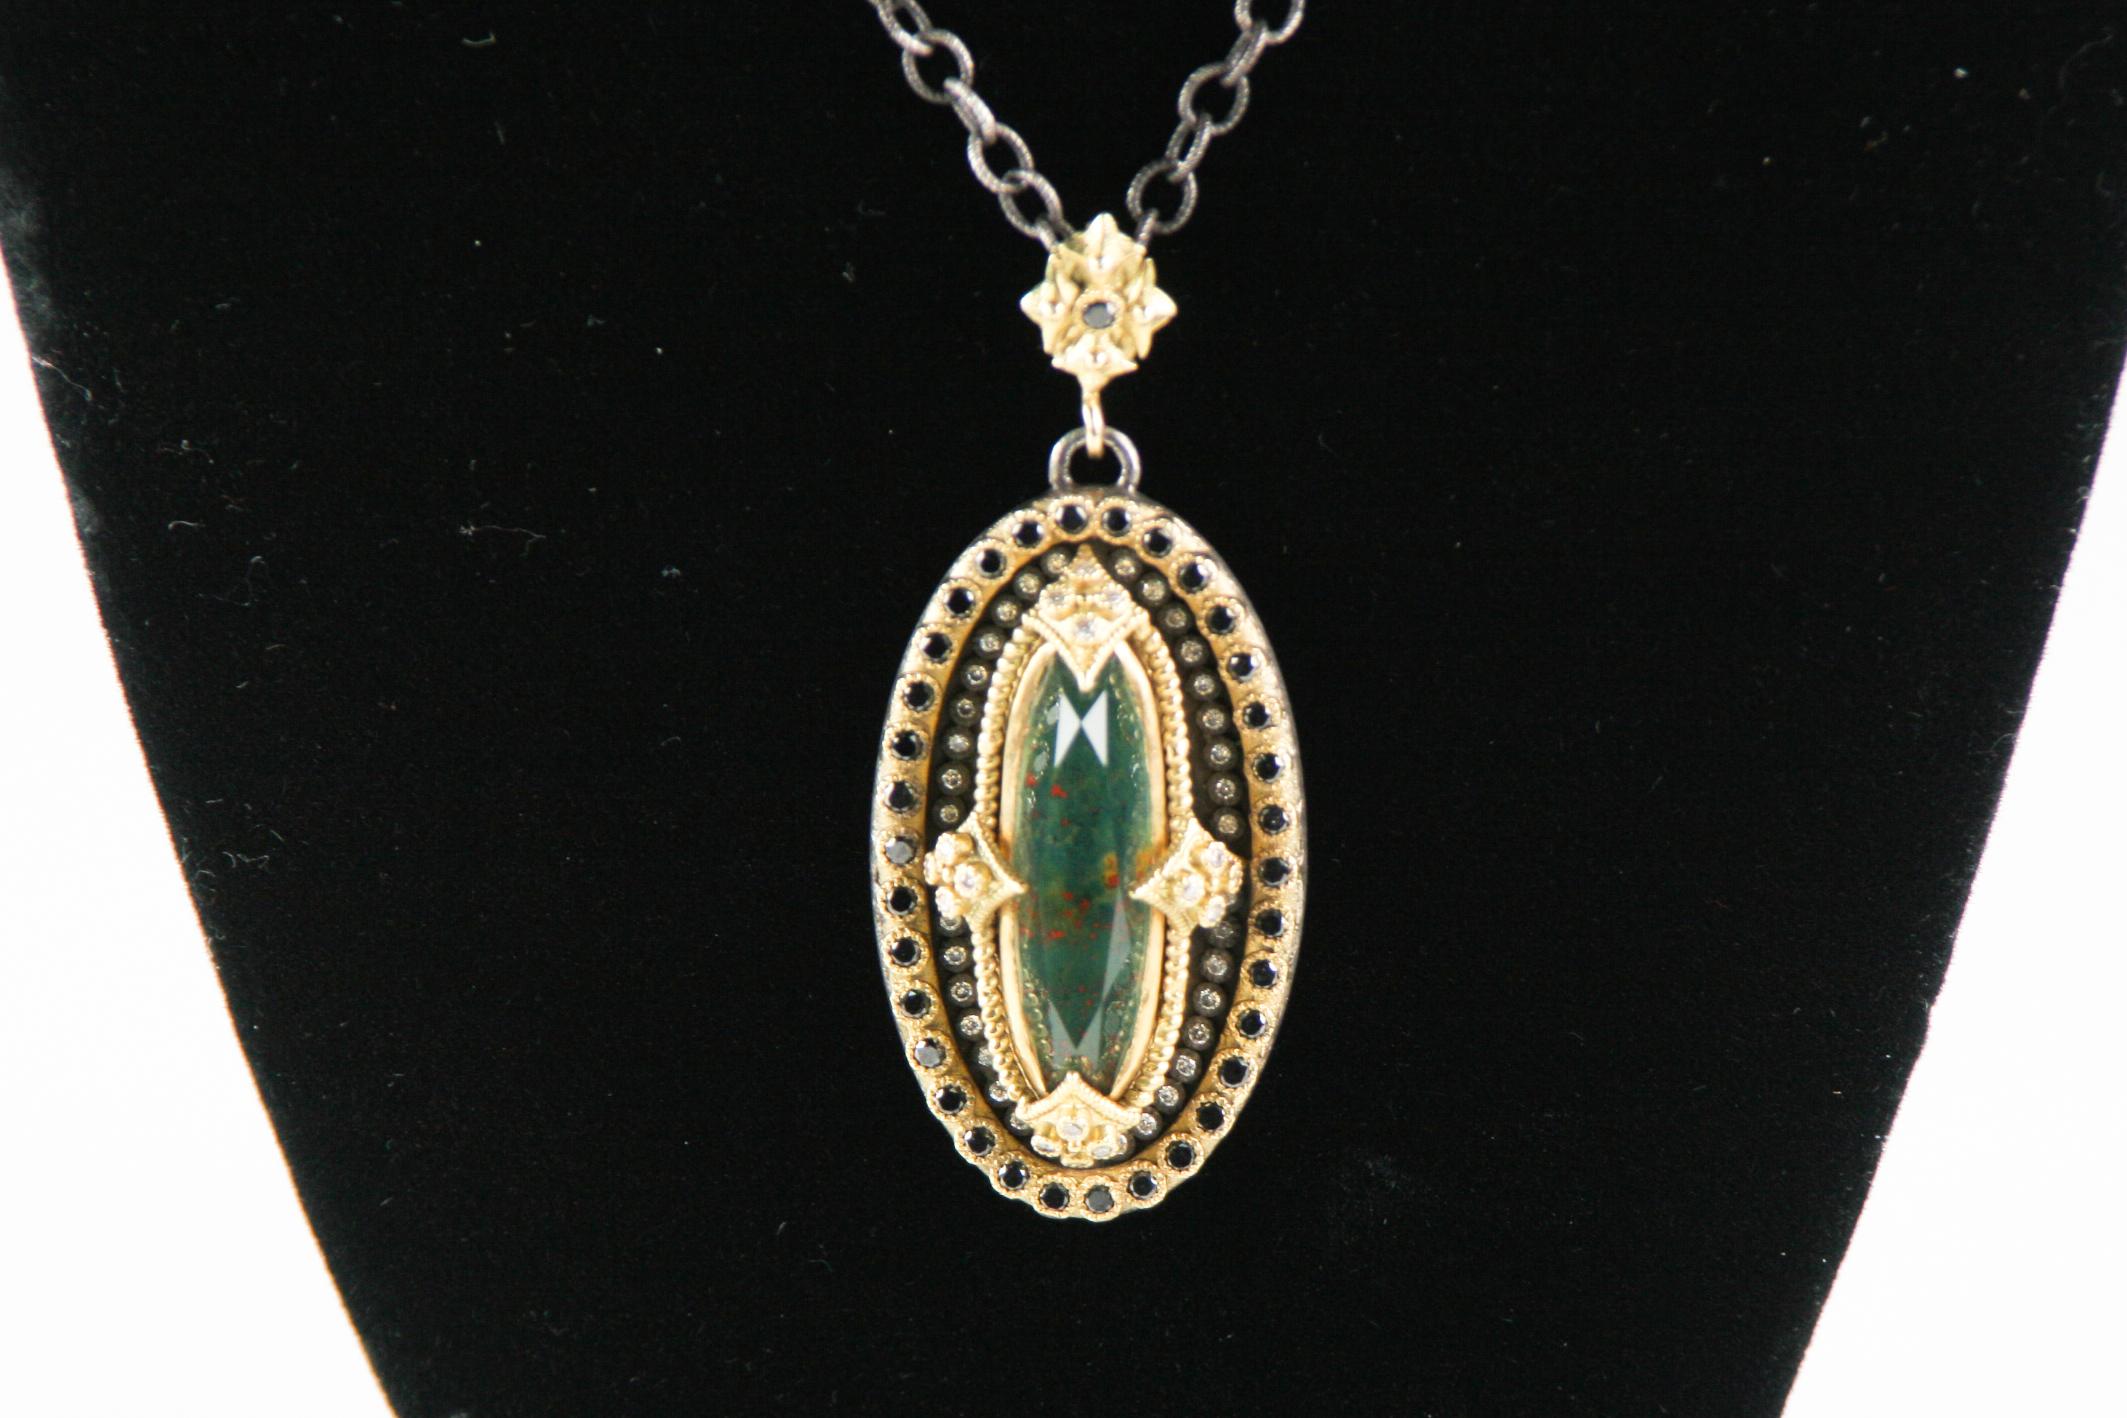 Beautiful 18k Yellow Gold and Oxidized Sterling Silver Pendant from Texan Jewelry Designer Emily Armenta
Pendant Features a Bloodstone Covered by a Faceted Quartz Set in an 18k Yellow Gold, Sterling Silver, and White & Black Diamond Bezel
Pendant